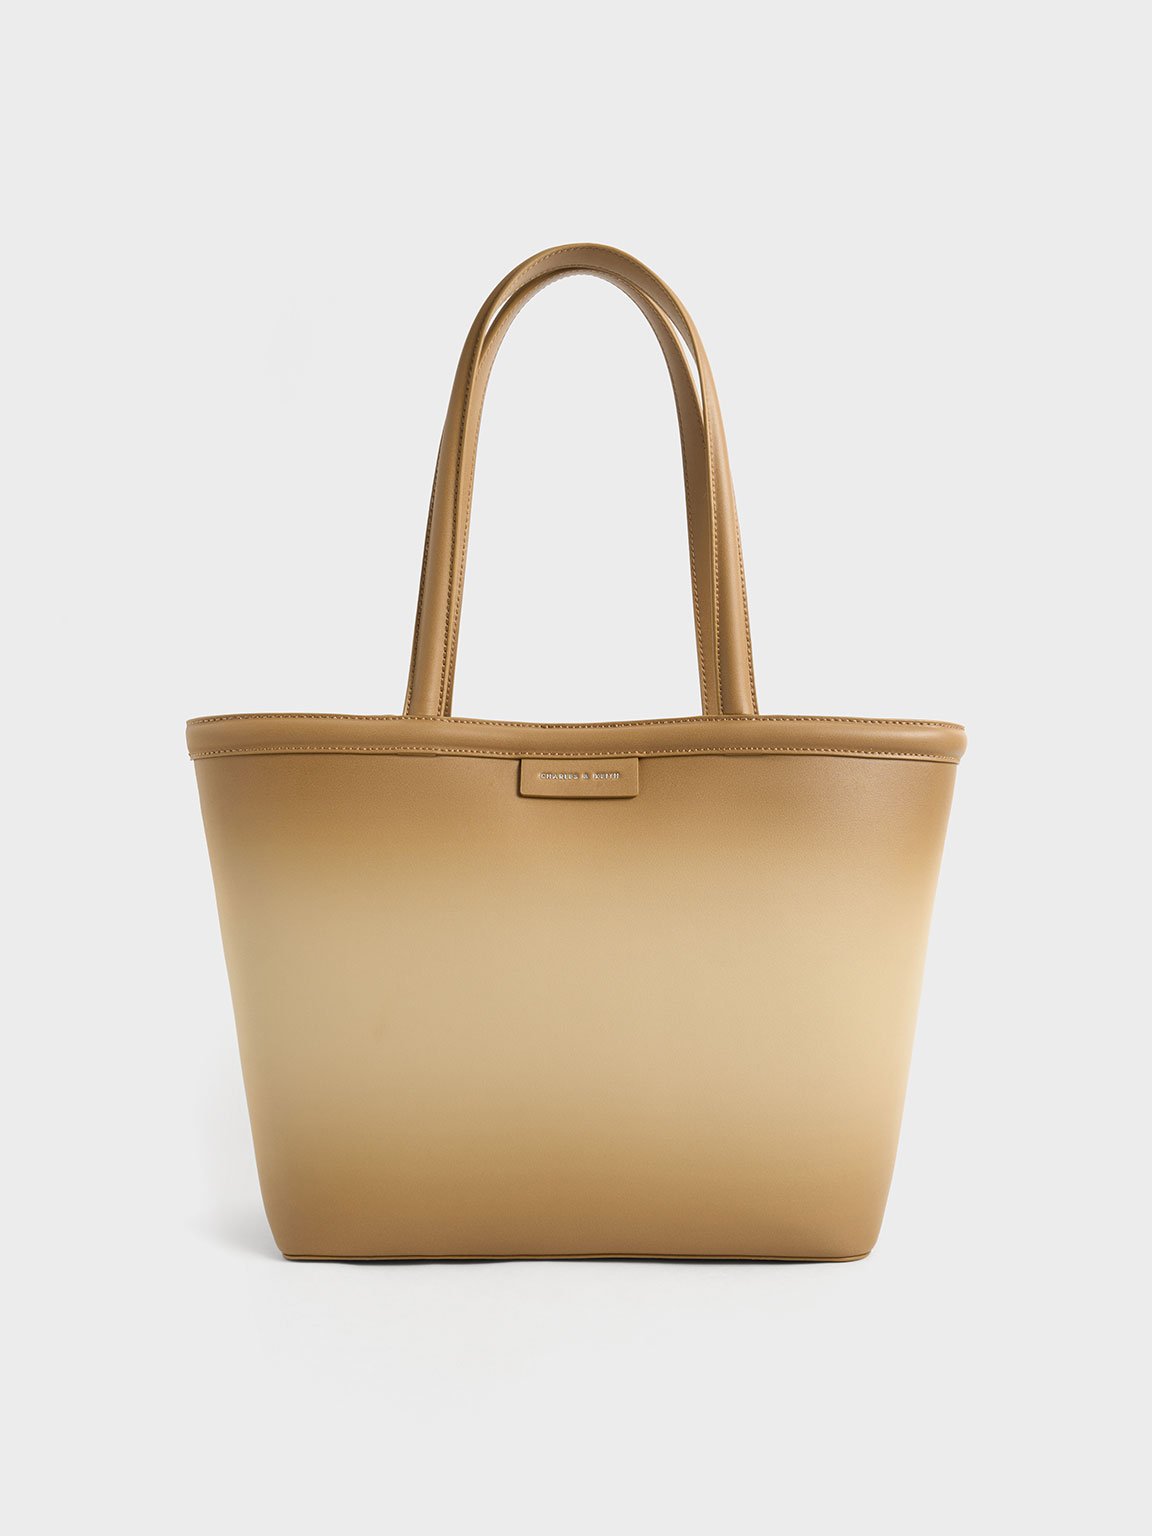 10 Timeless Longchamp Bags To Consider For Your First Big Purchase